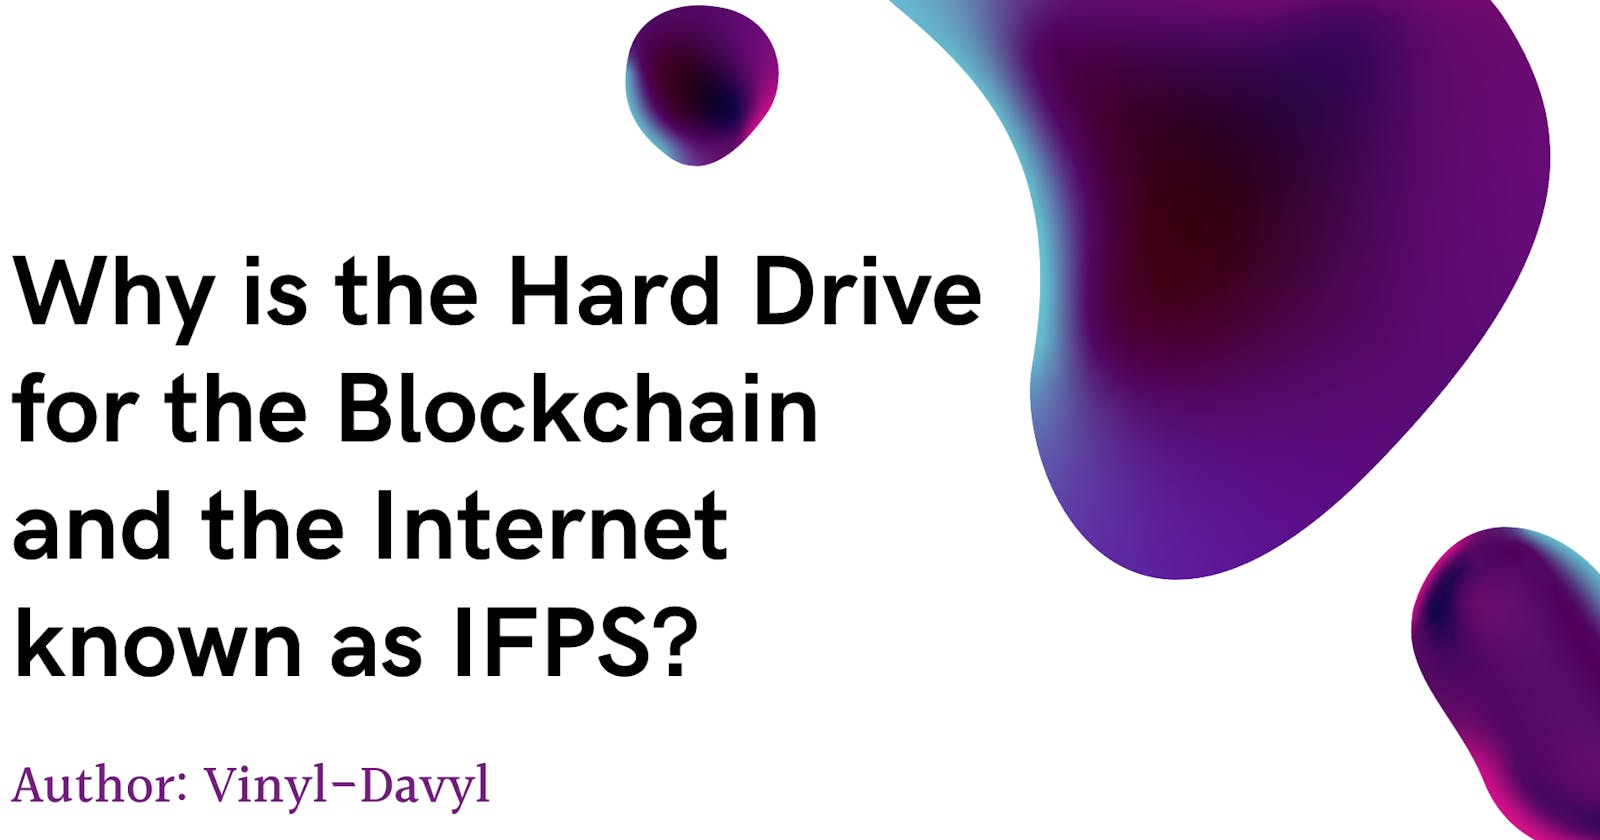 Why is the Hard Drive for Blockchain and the Internet known as IPFS?